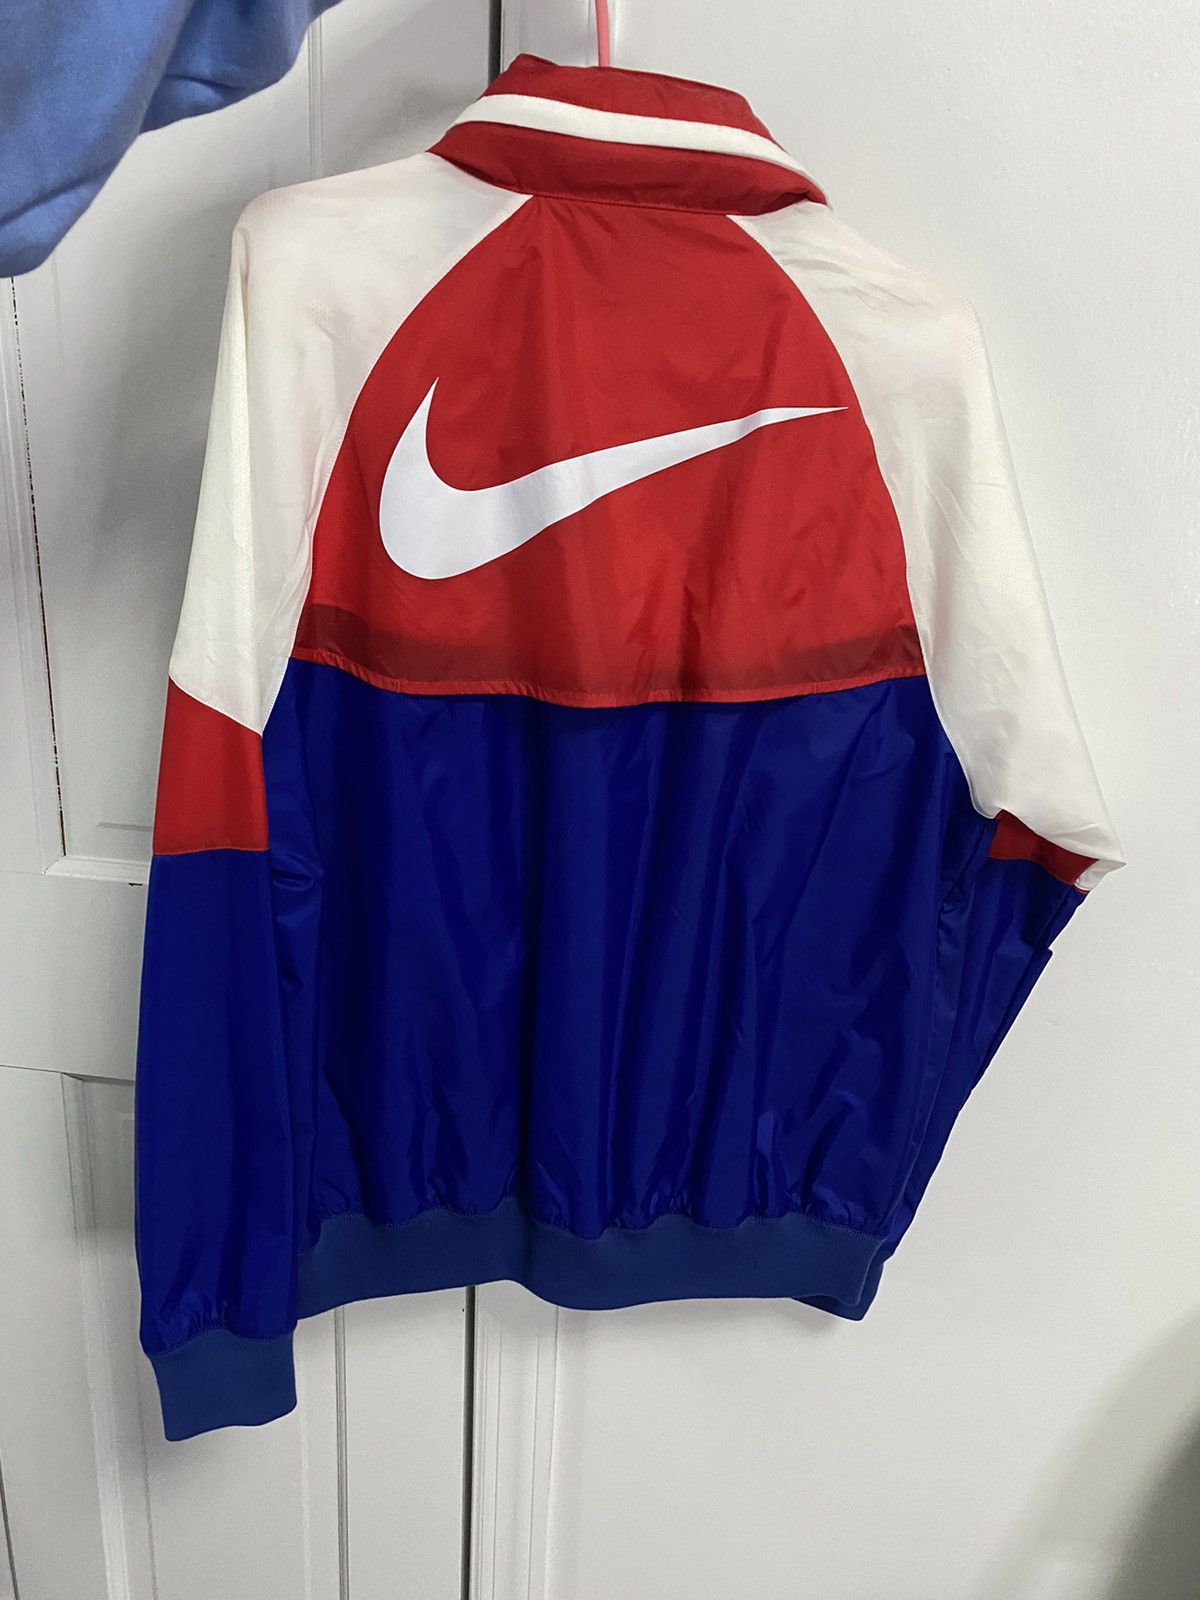 Nike Nike tracksuit Size US S / EU 44-46 / 1 - 1 Preview